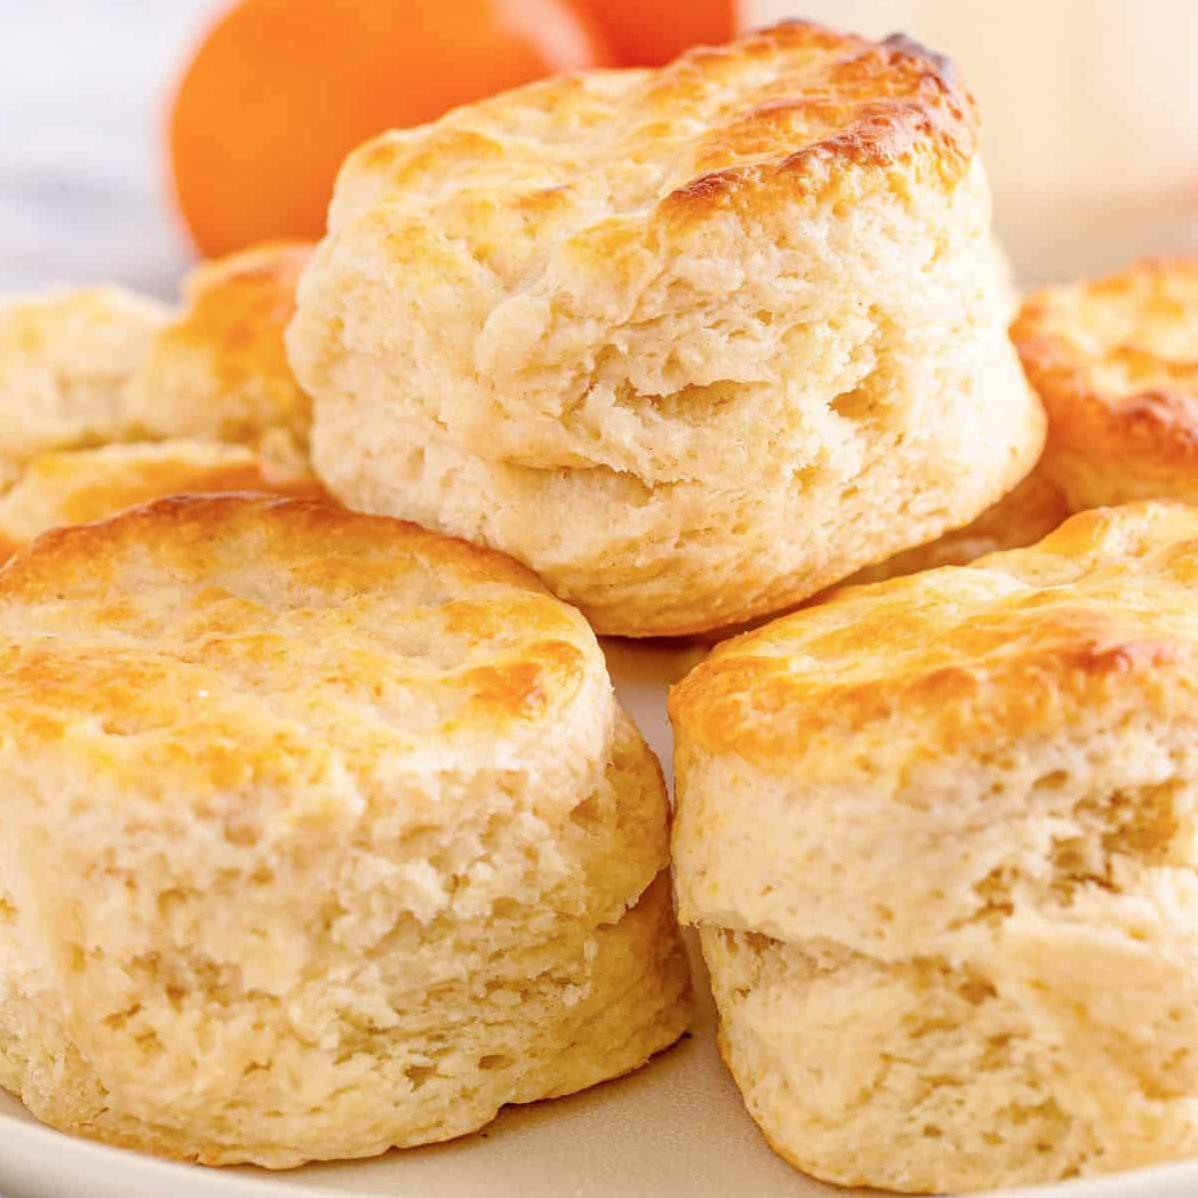  These biscuits will make your taste buds dance with joy